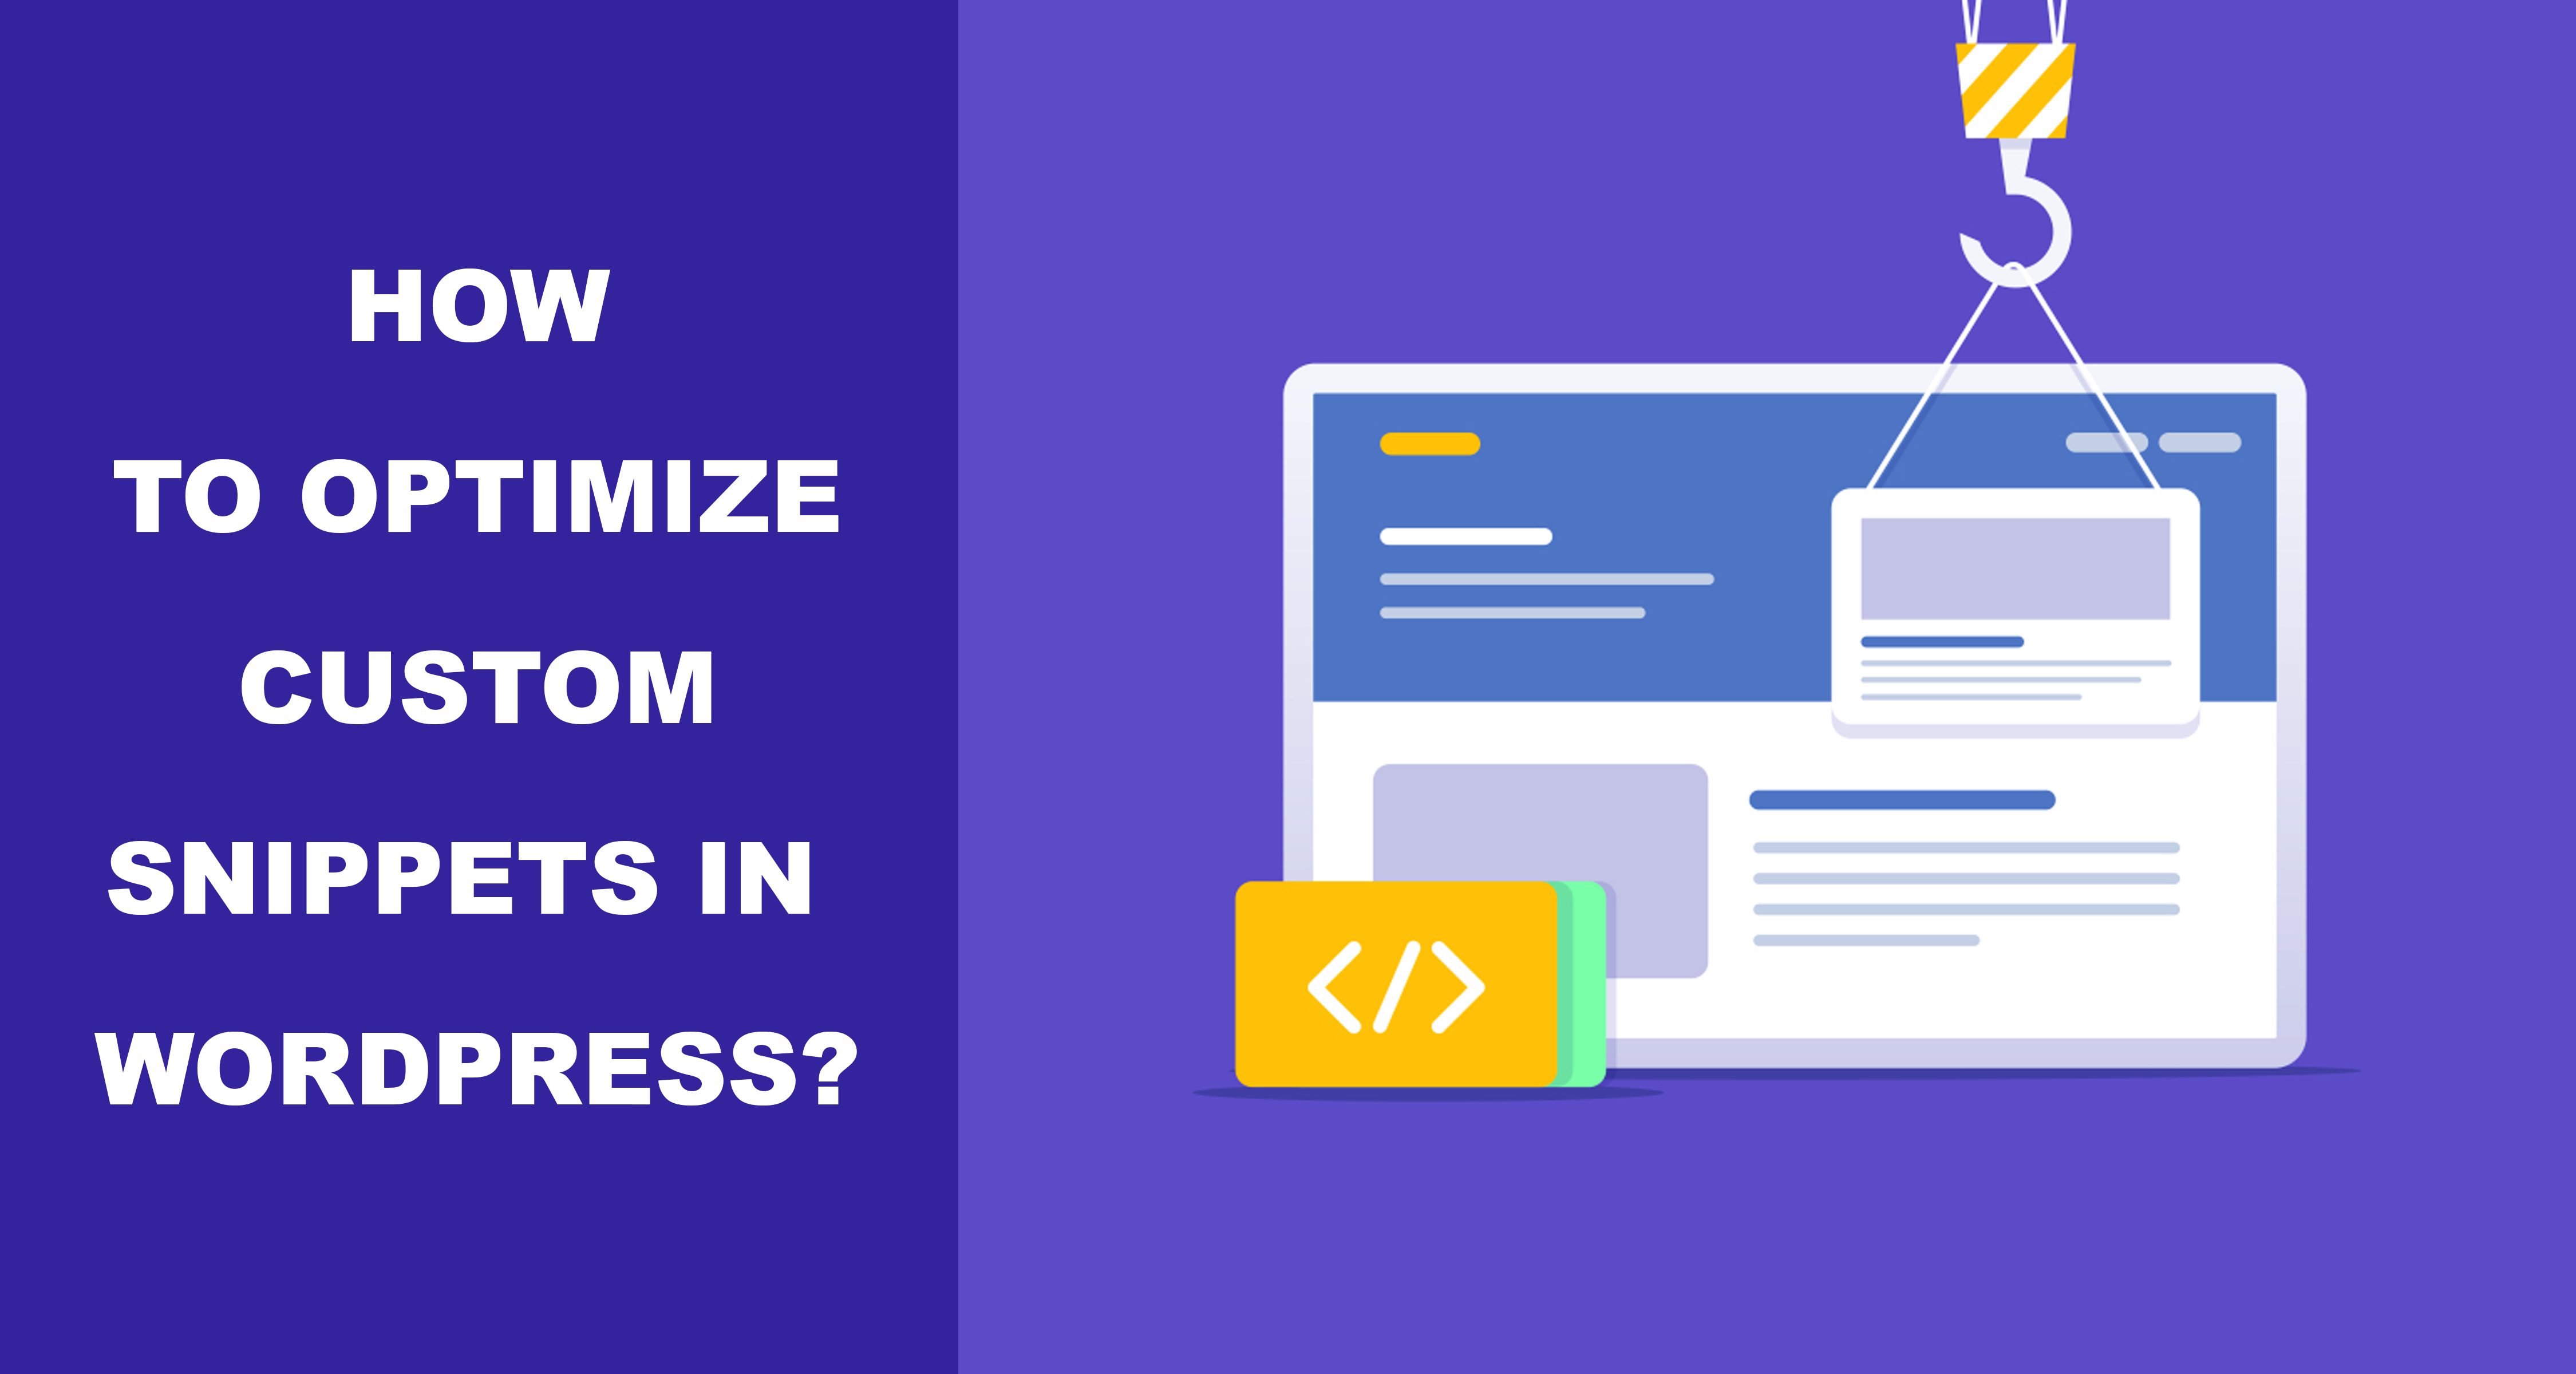 How To Optimize Custom Snippets In WordPress